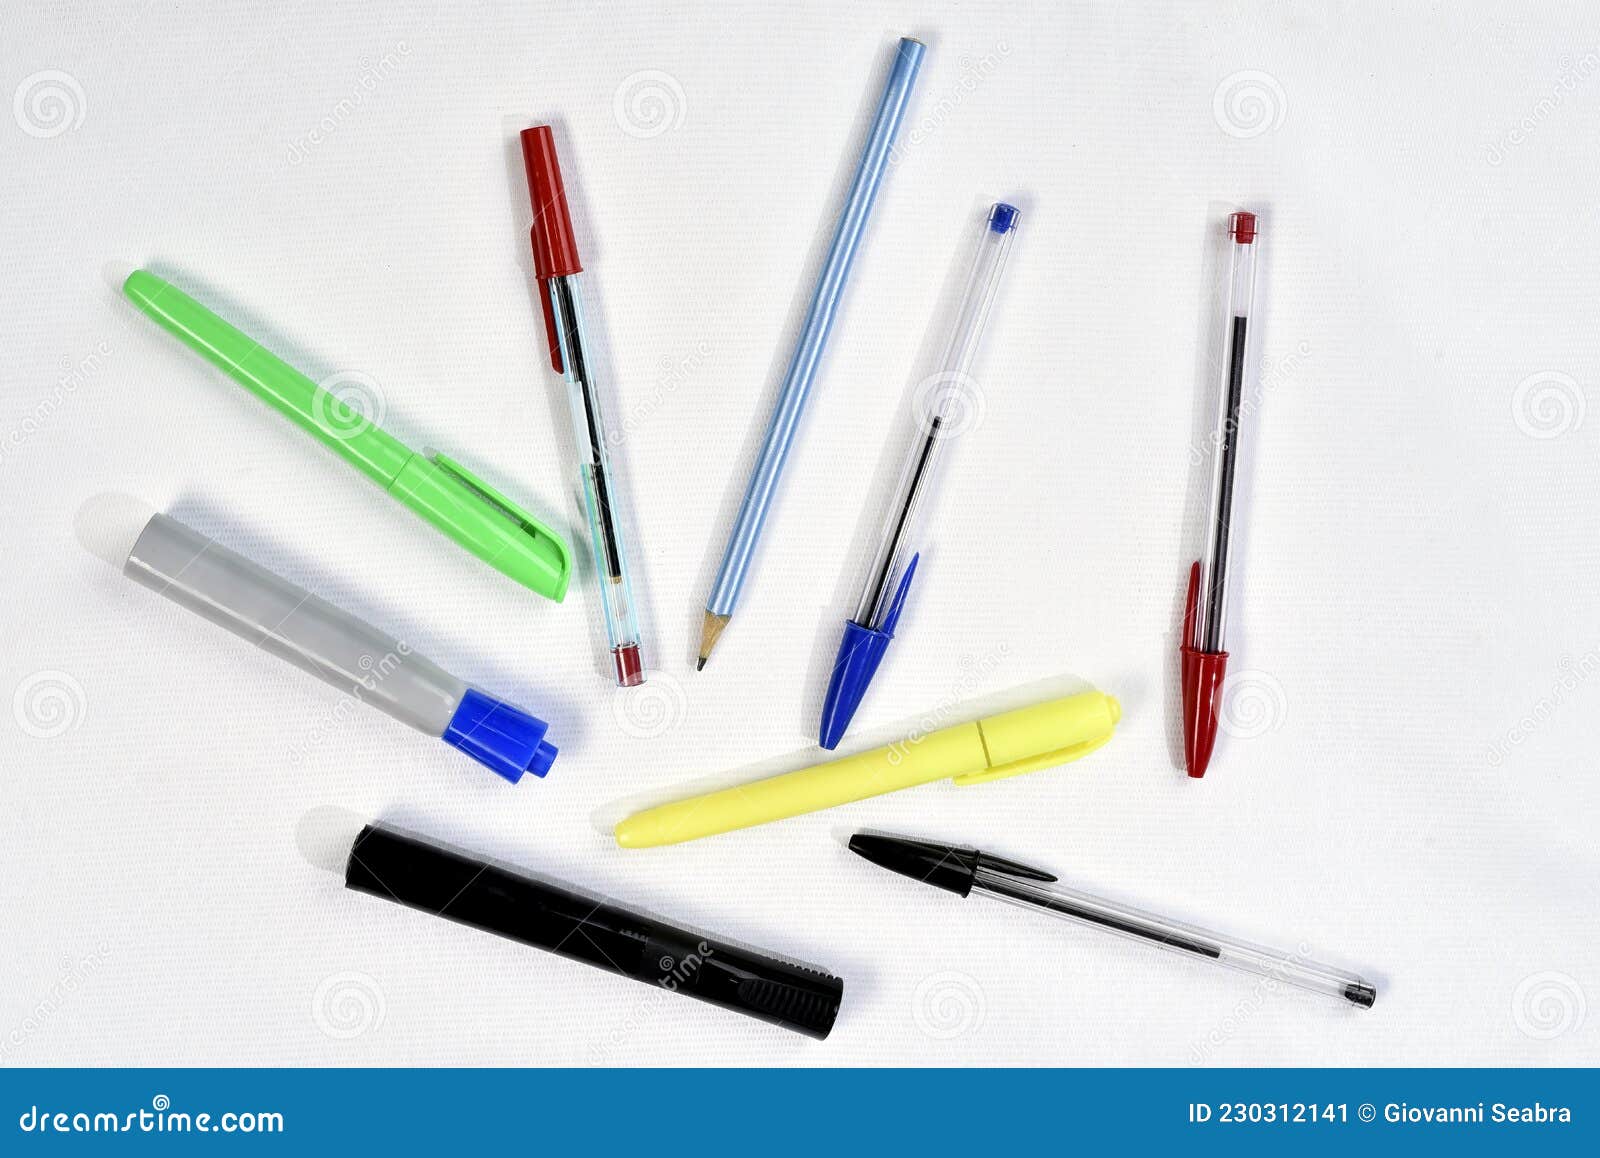 several colored pens used in schools and offices  with space for text